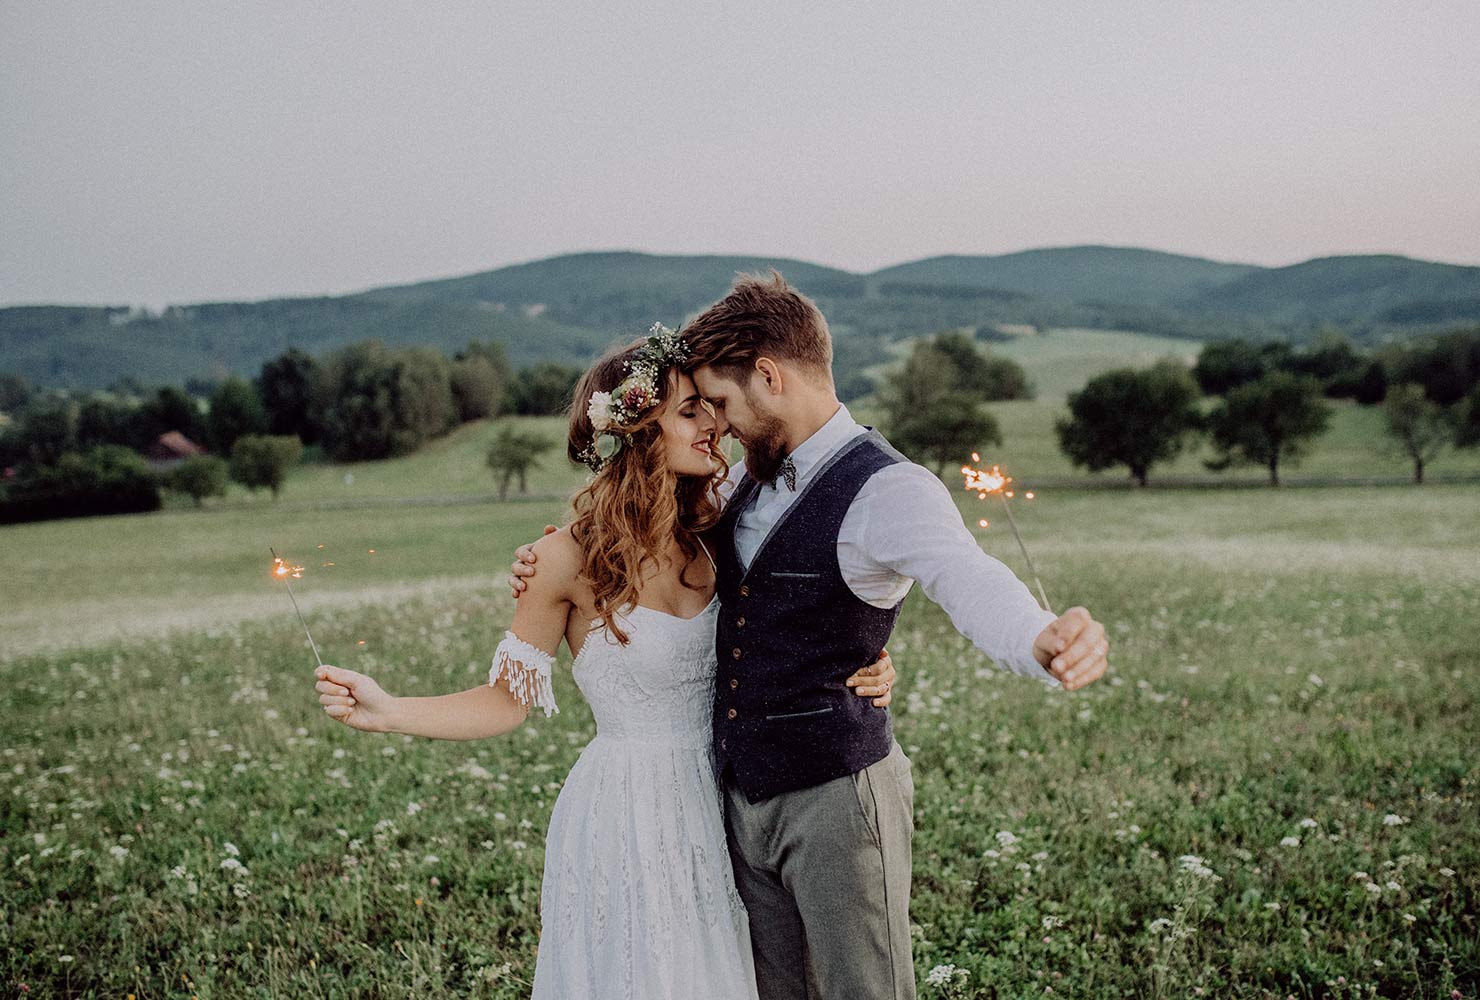 Bride and groom in an open field.